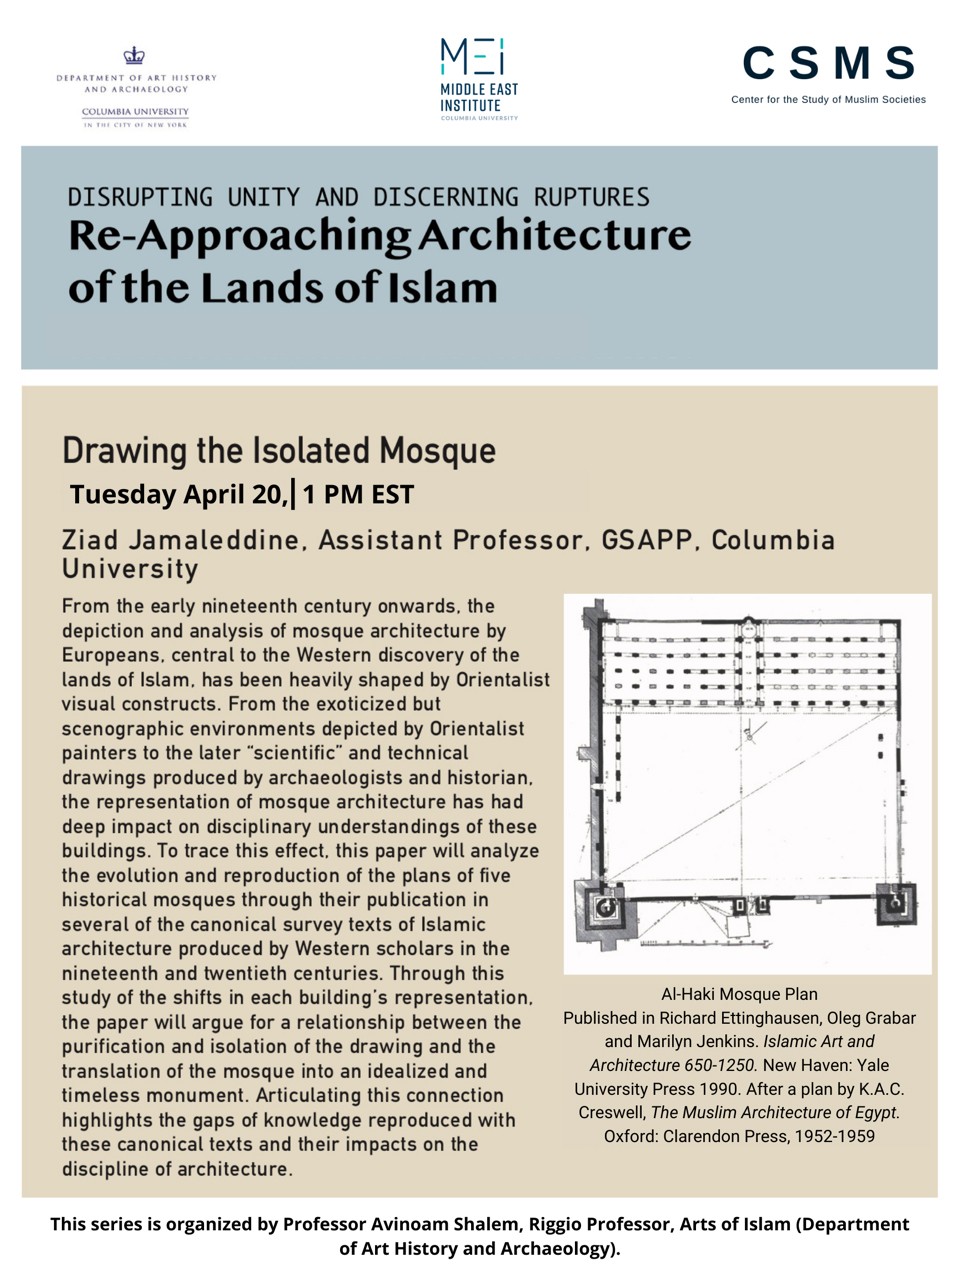 poster for Drawing the Isolated Mosque